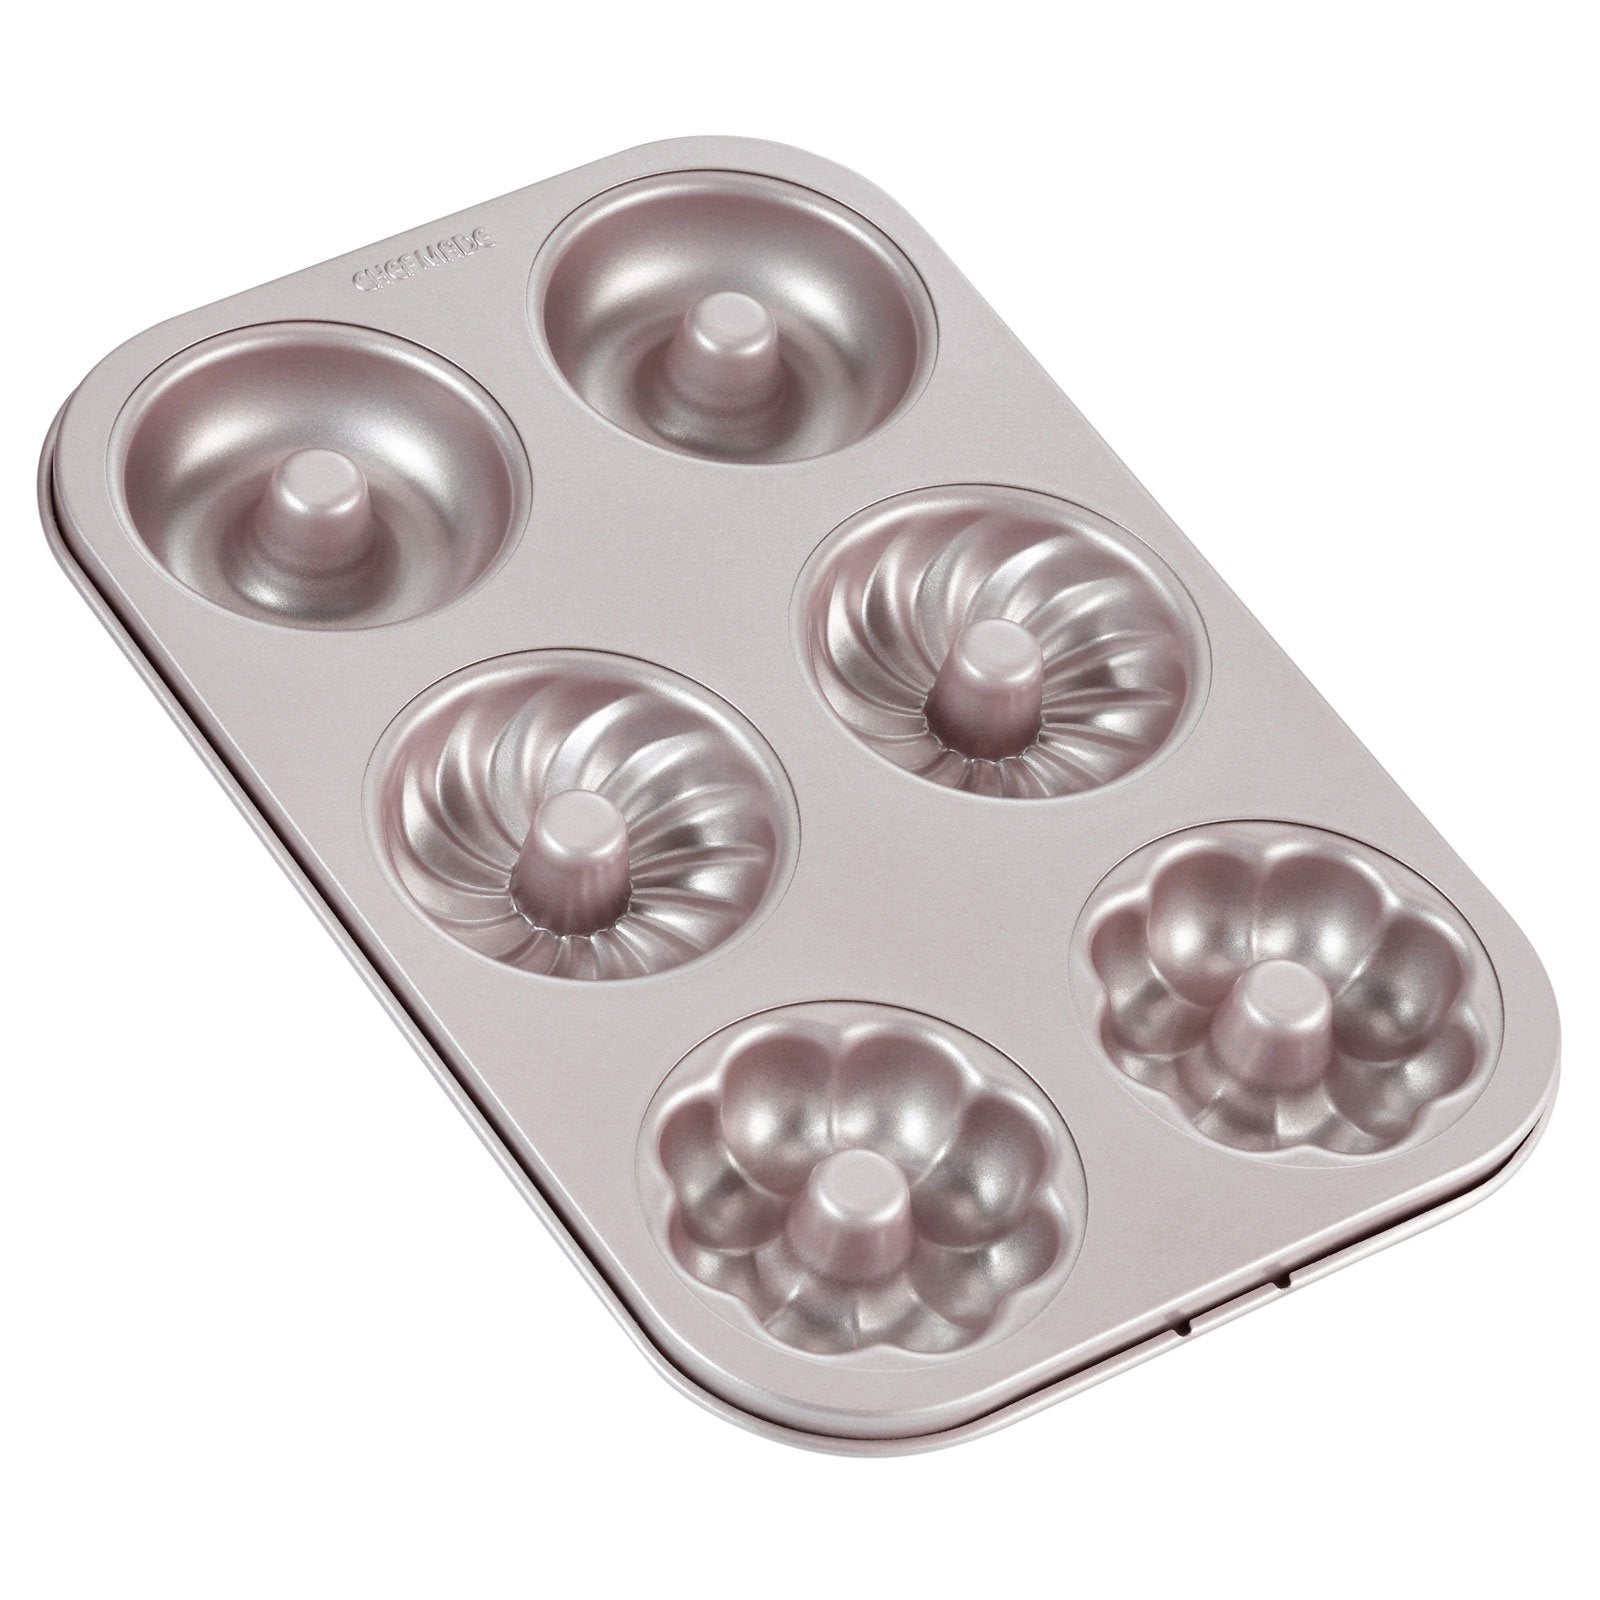 Donut Cake Pan Fancy-Shaped 6 Well - CHEFMADE official store